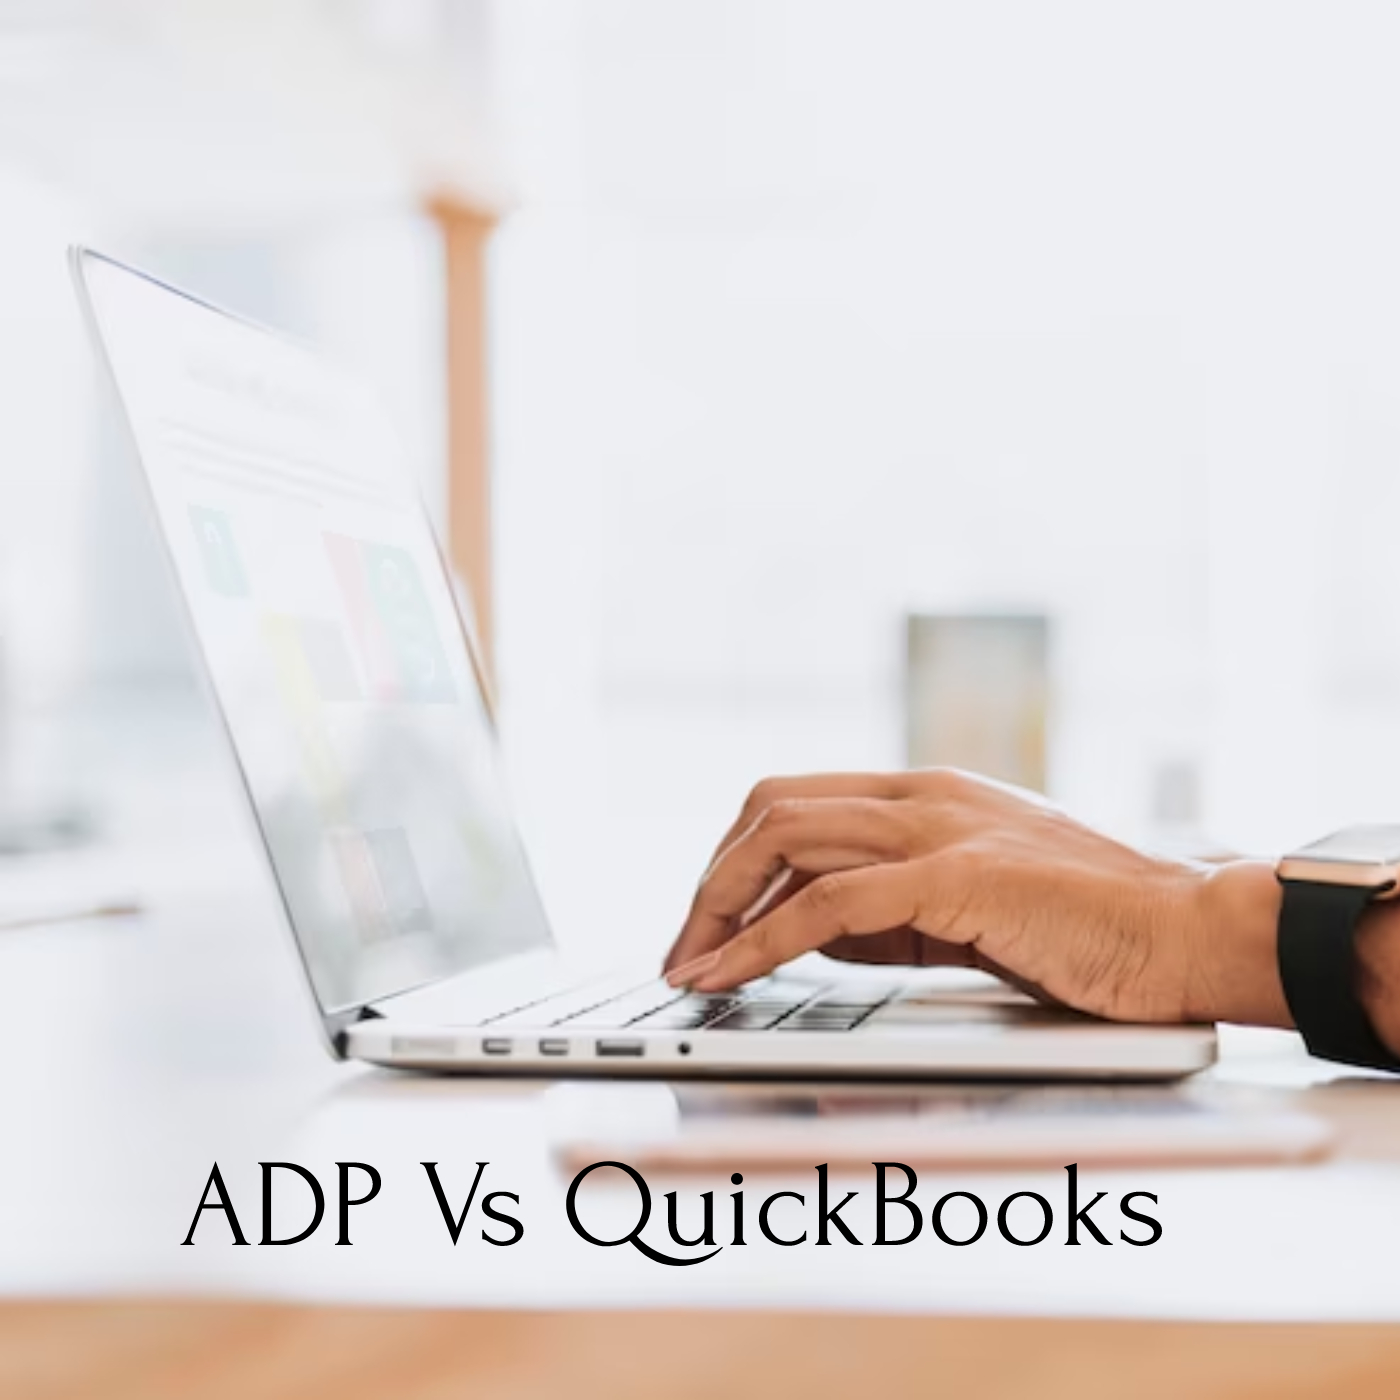 ADP vs QuickBooks: A Battle of Payroll and Accounting Software